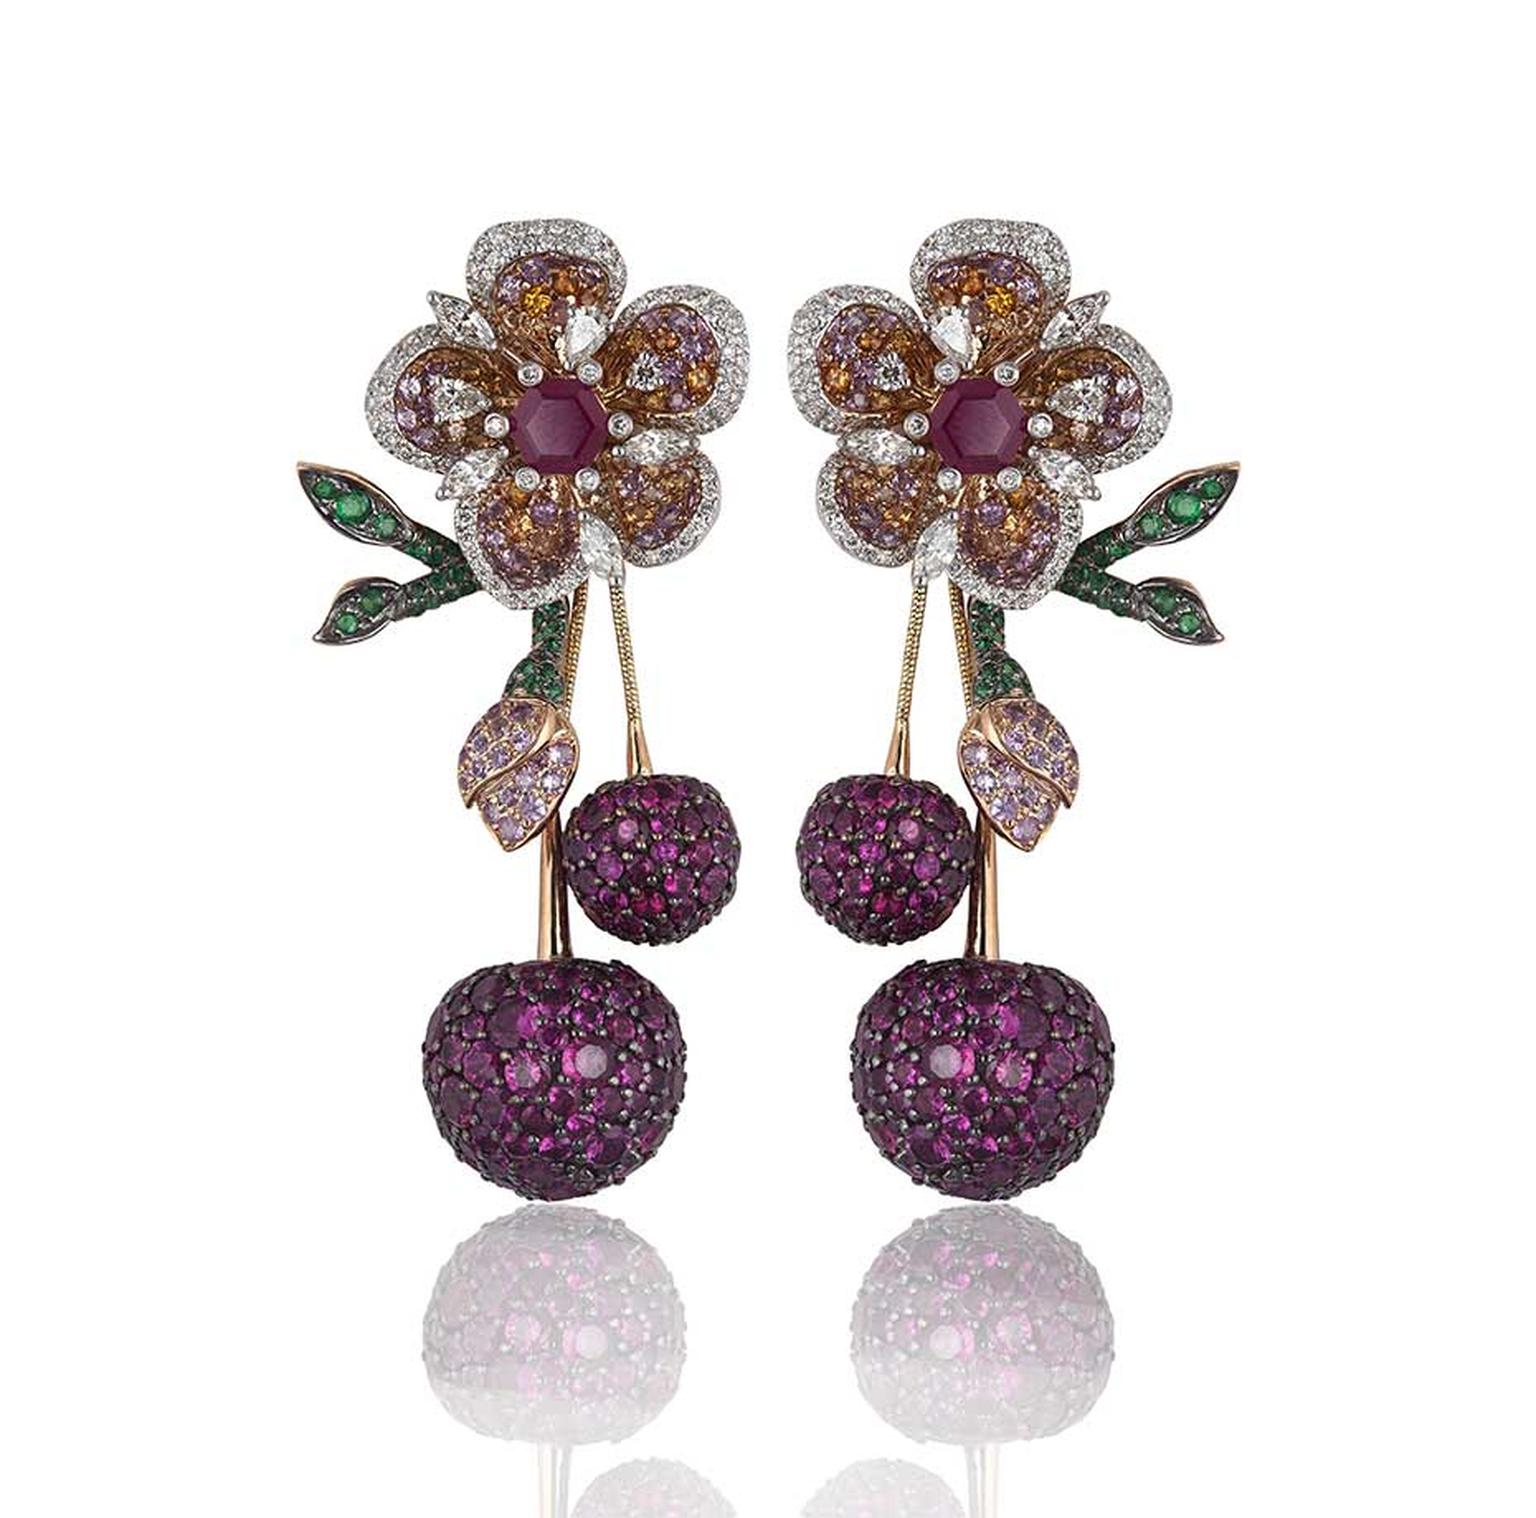 Lot 6, a pair of Gemfields Mozambican ruby, Gemfields Zambian emerald, diamond, pink sapphire and orange sapphire earrings by Mirari, being auctioned as part of a suite (estimate: INR 3,600,000 - 4,350,000; $60,000 - 73,000)